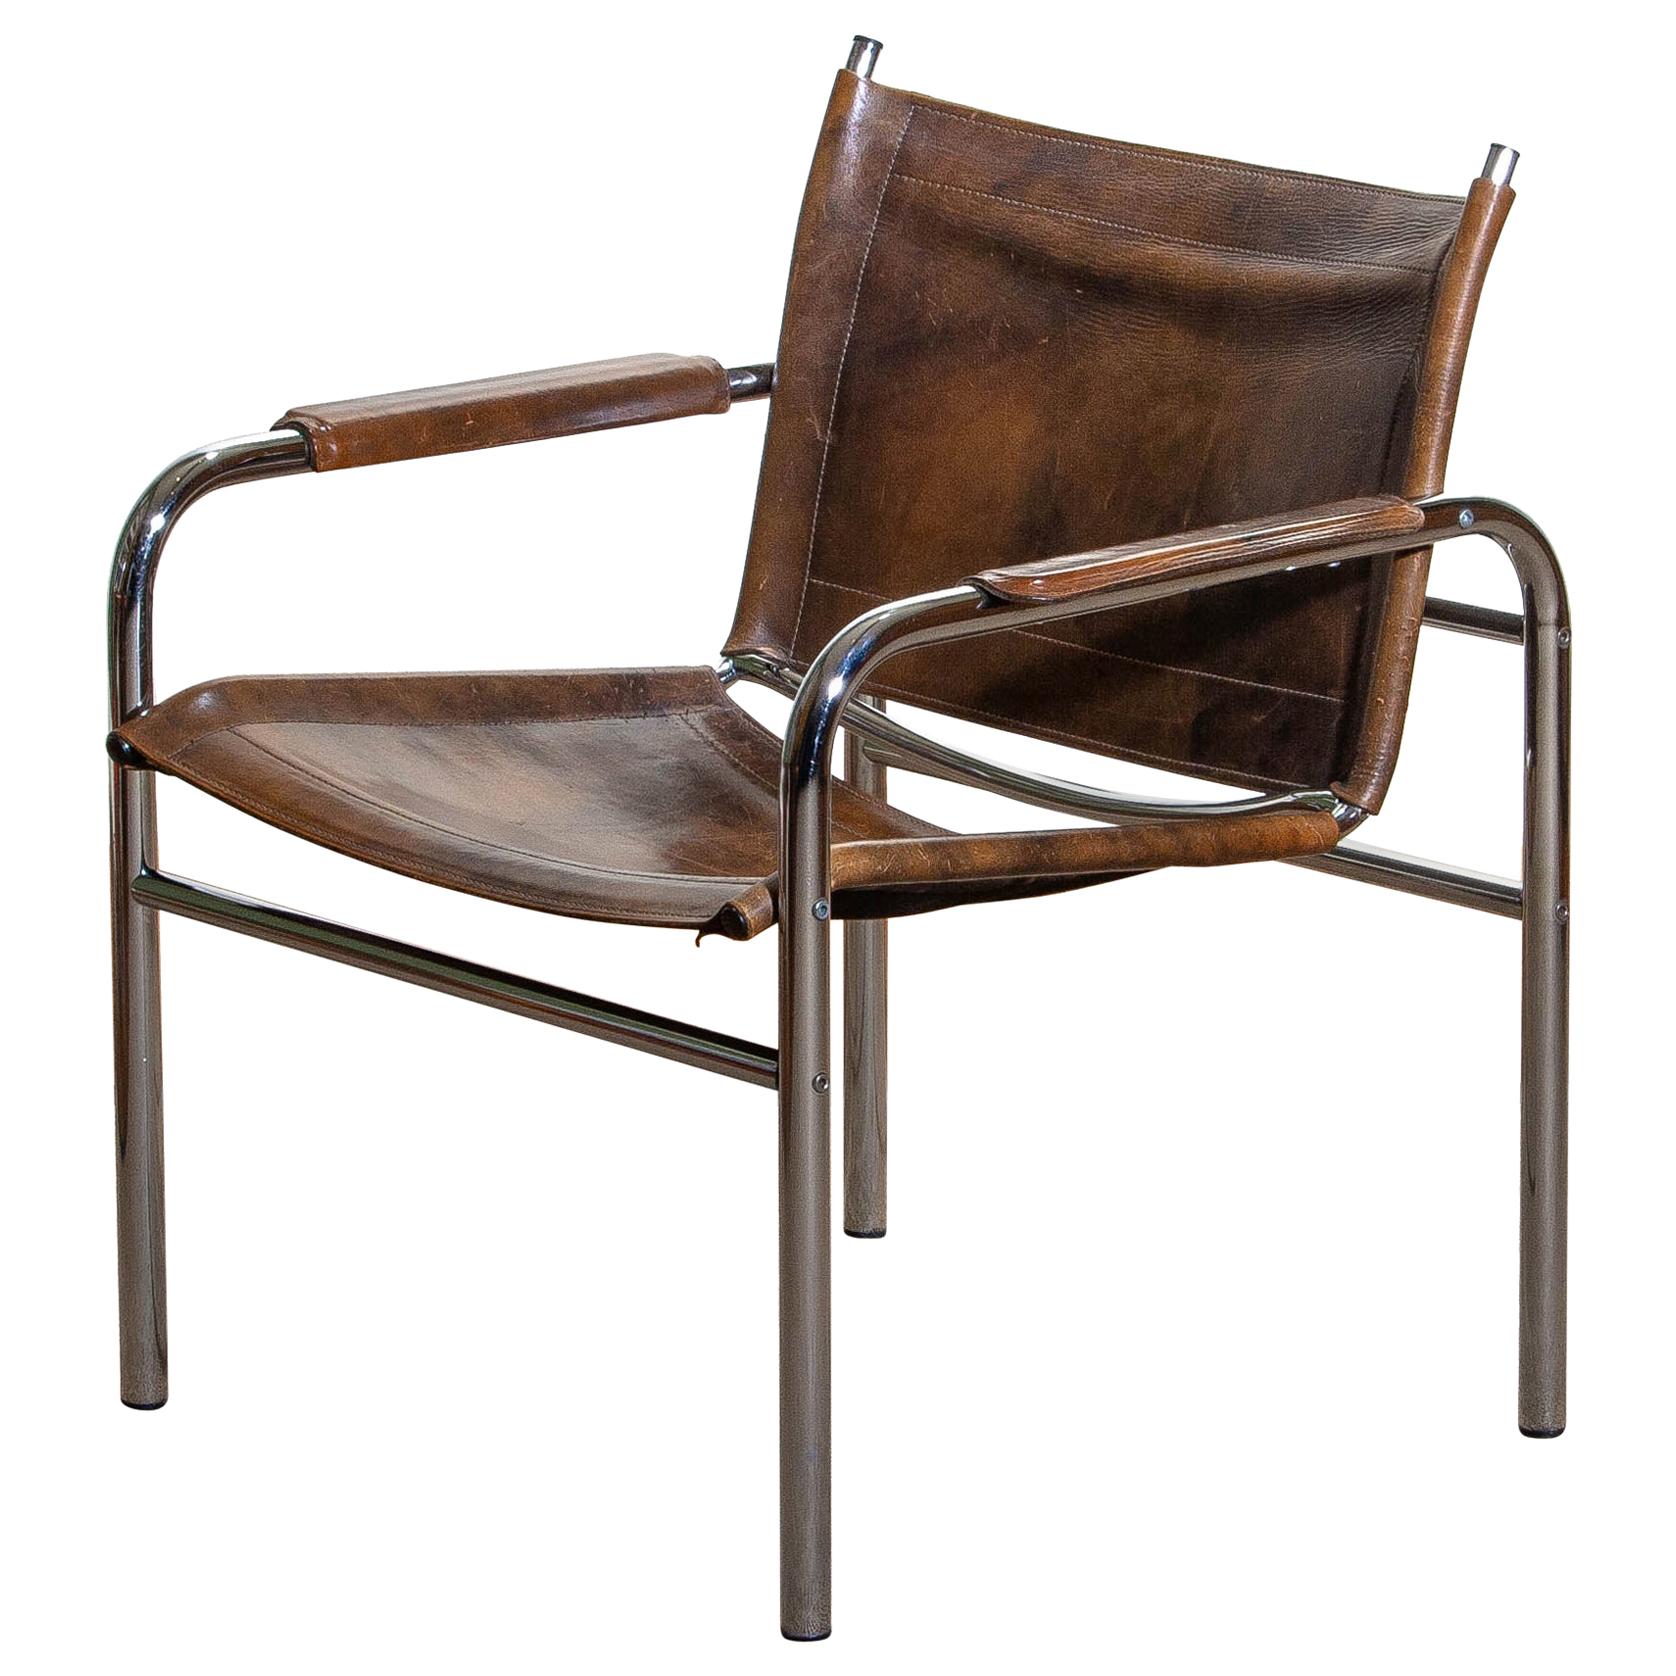 Beautiful armchair, model Klinte, designed by Tord Bjorklund, Sweden. The chair has a tubular chromed steel frame with brown-taupe leather back / seating and armrests with a beautiful patina.
Period: 1980.

Note: We have two of these chairs in